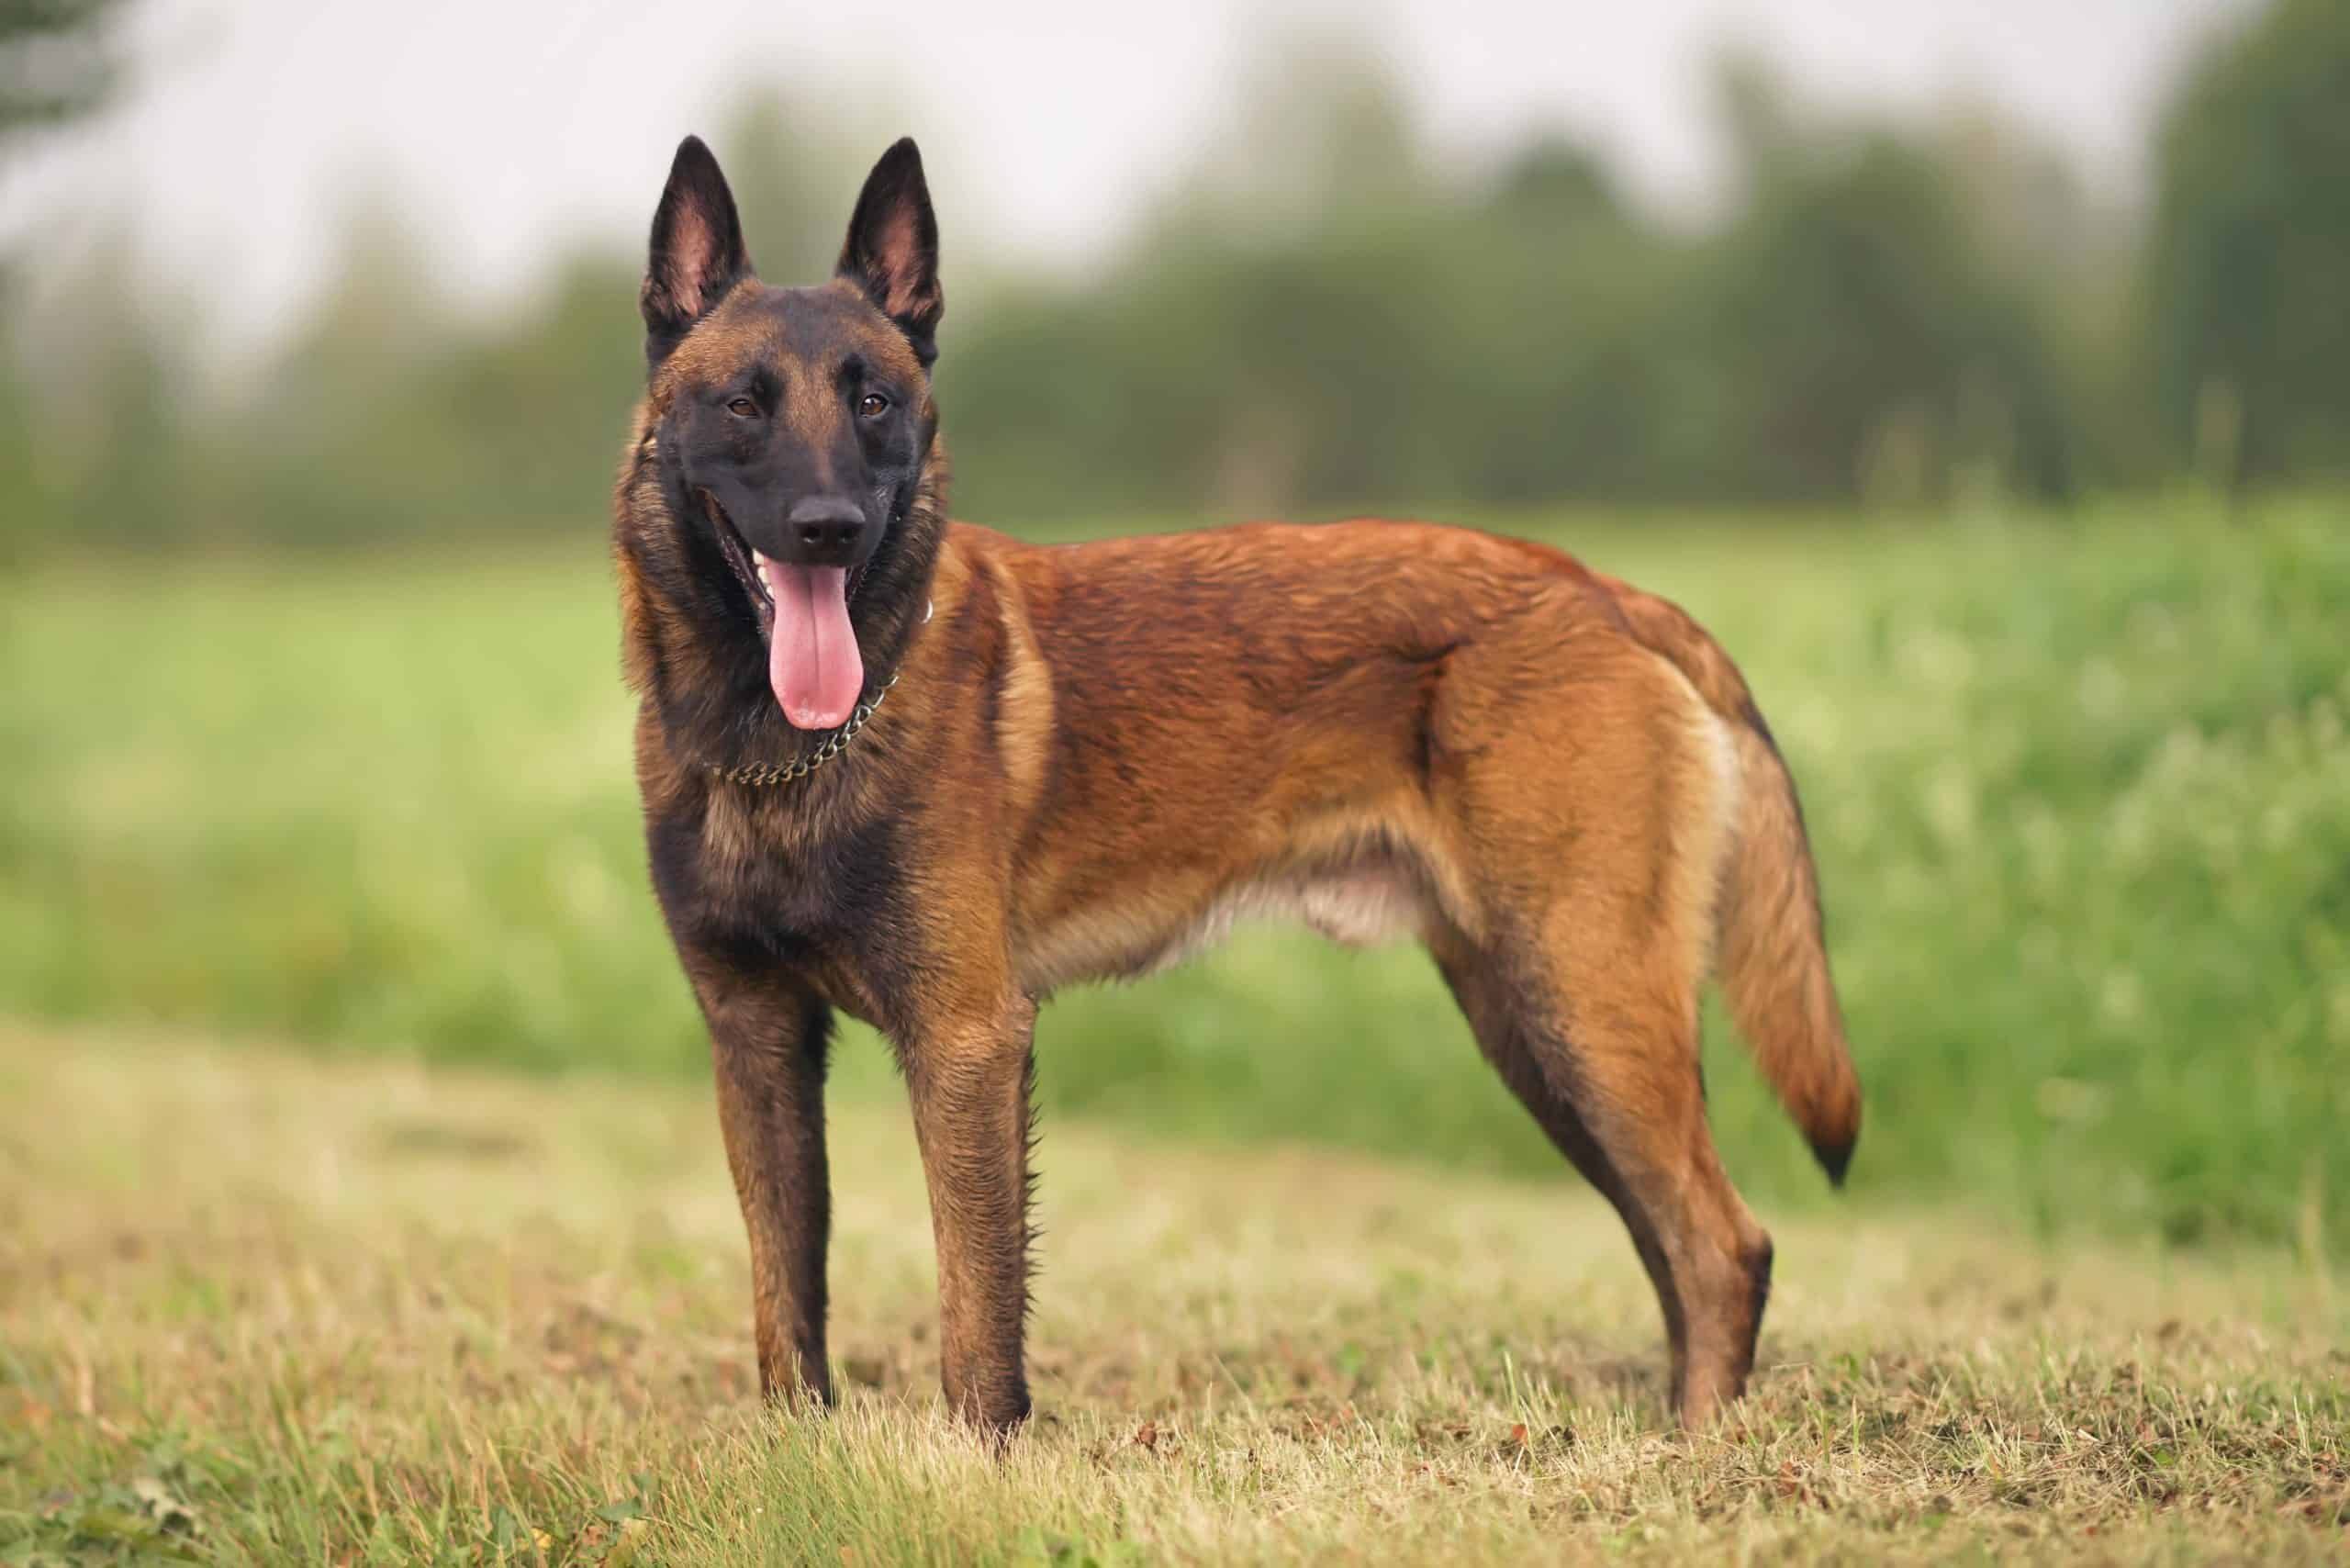 Belgian Malinois Smart dogs often used for police or